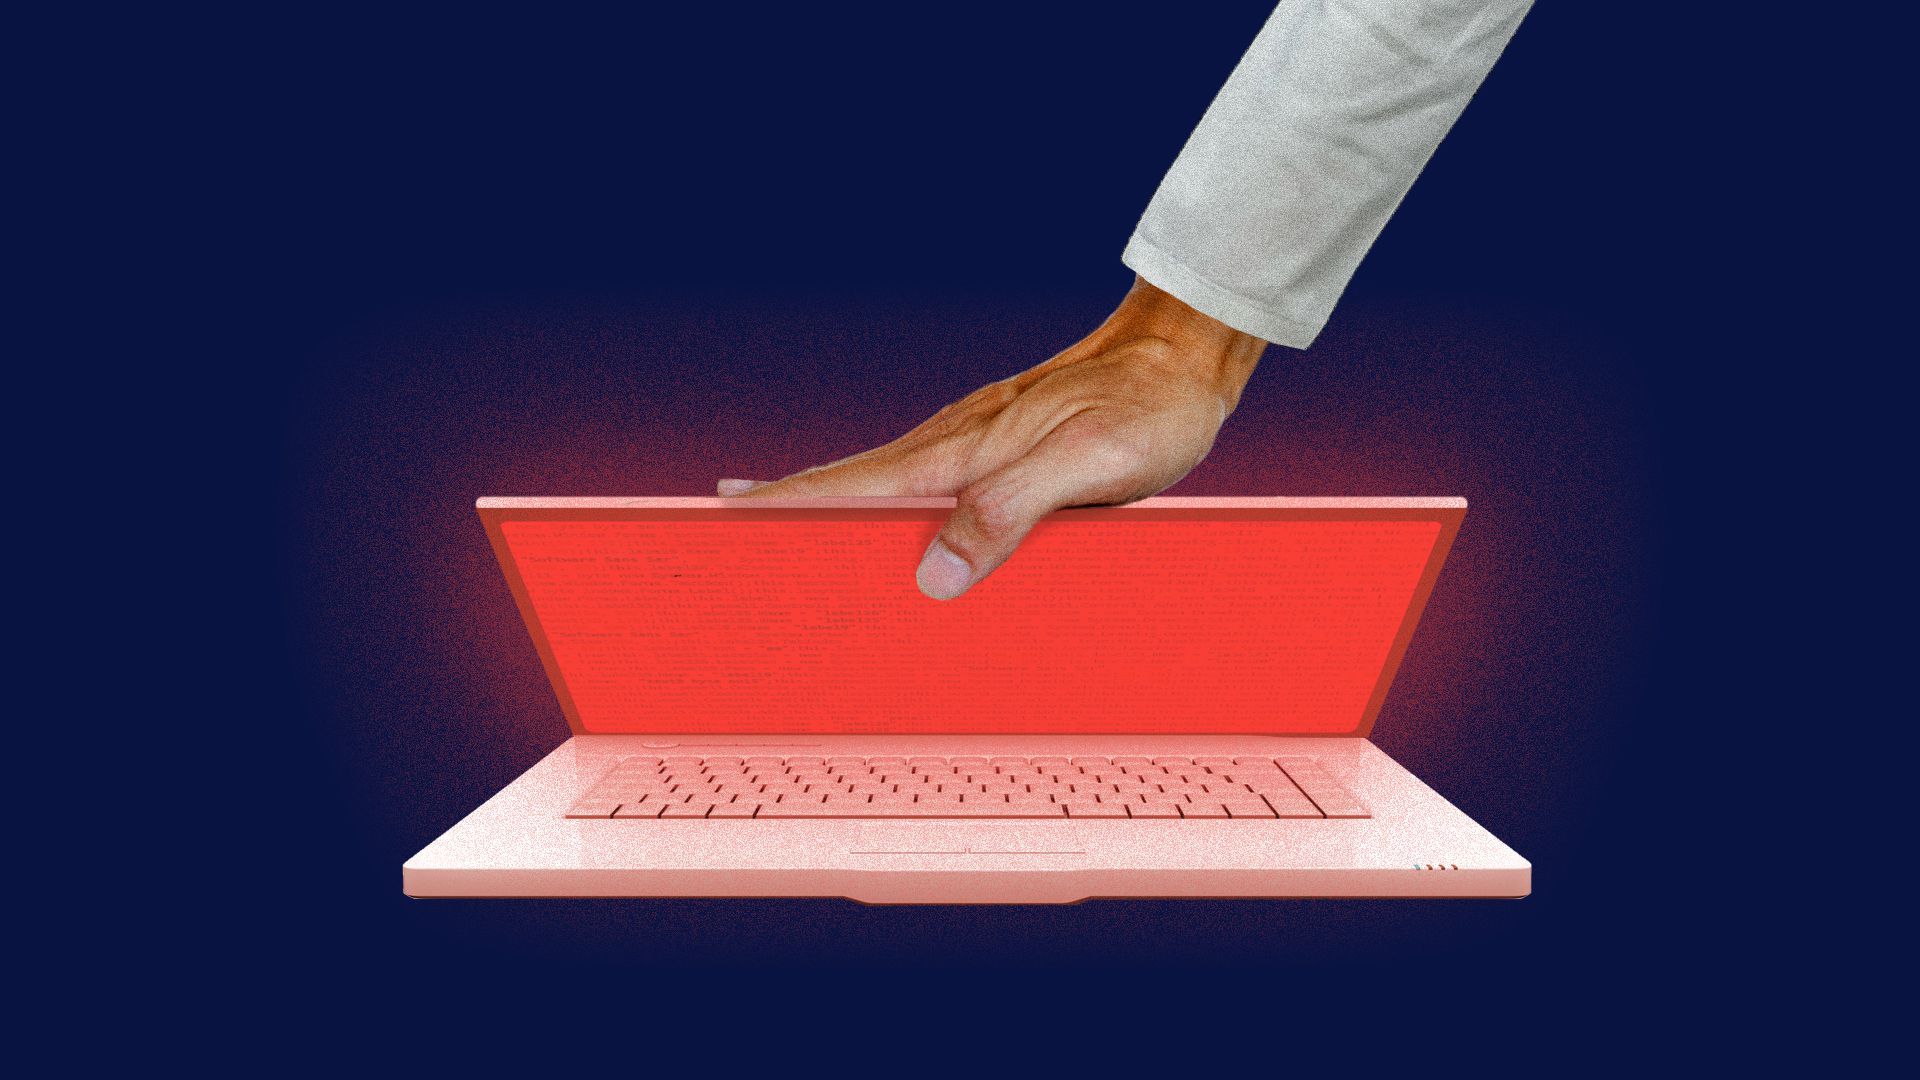 Illustration of a hand closing a laptop with a red screen